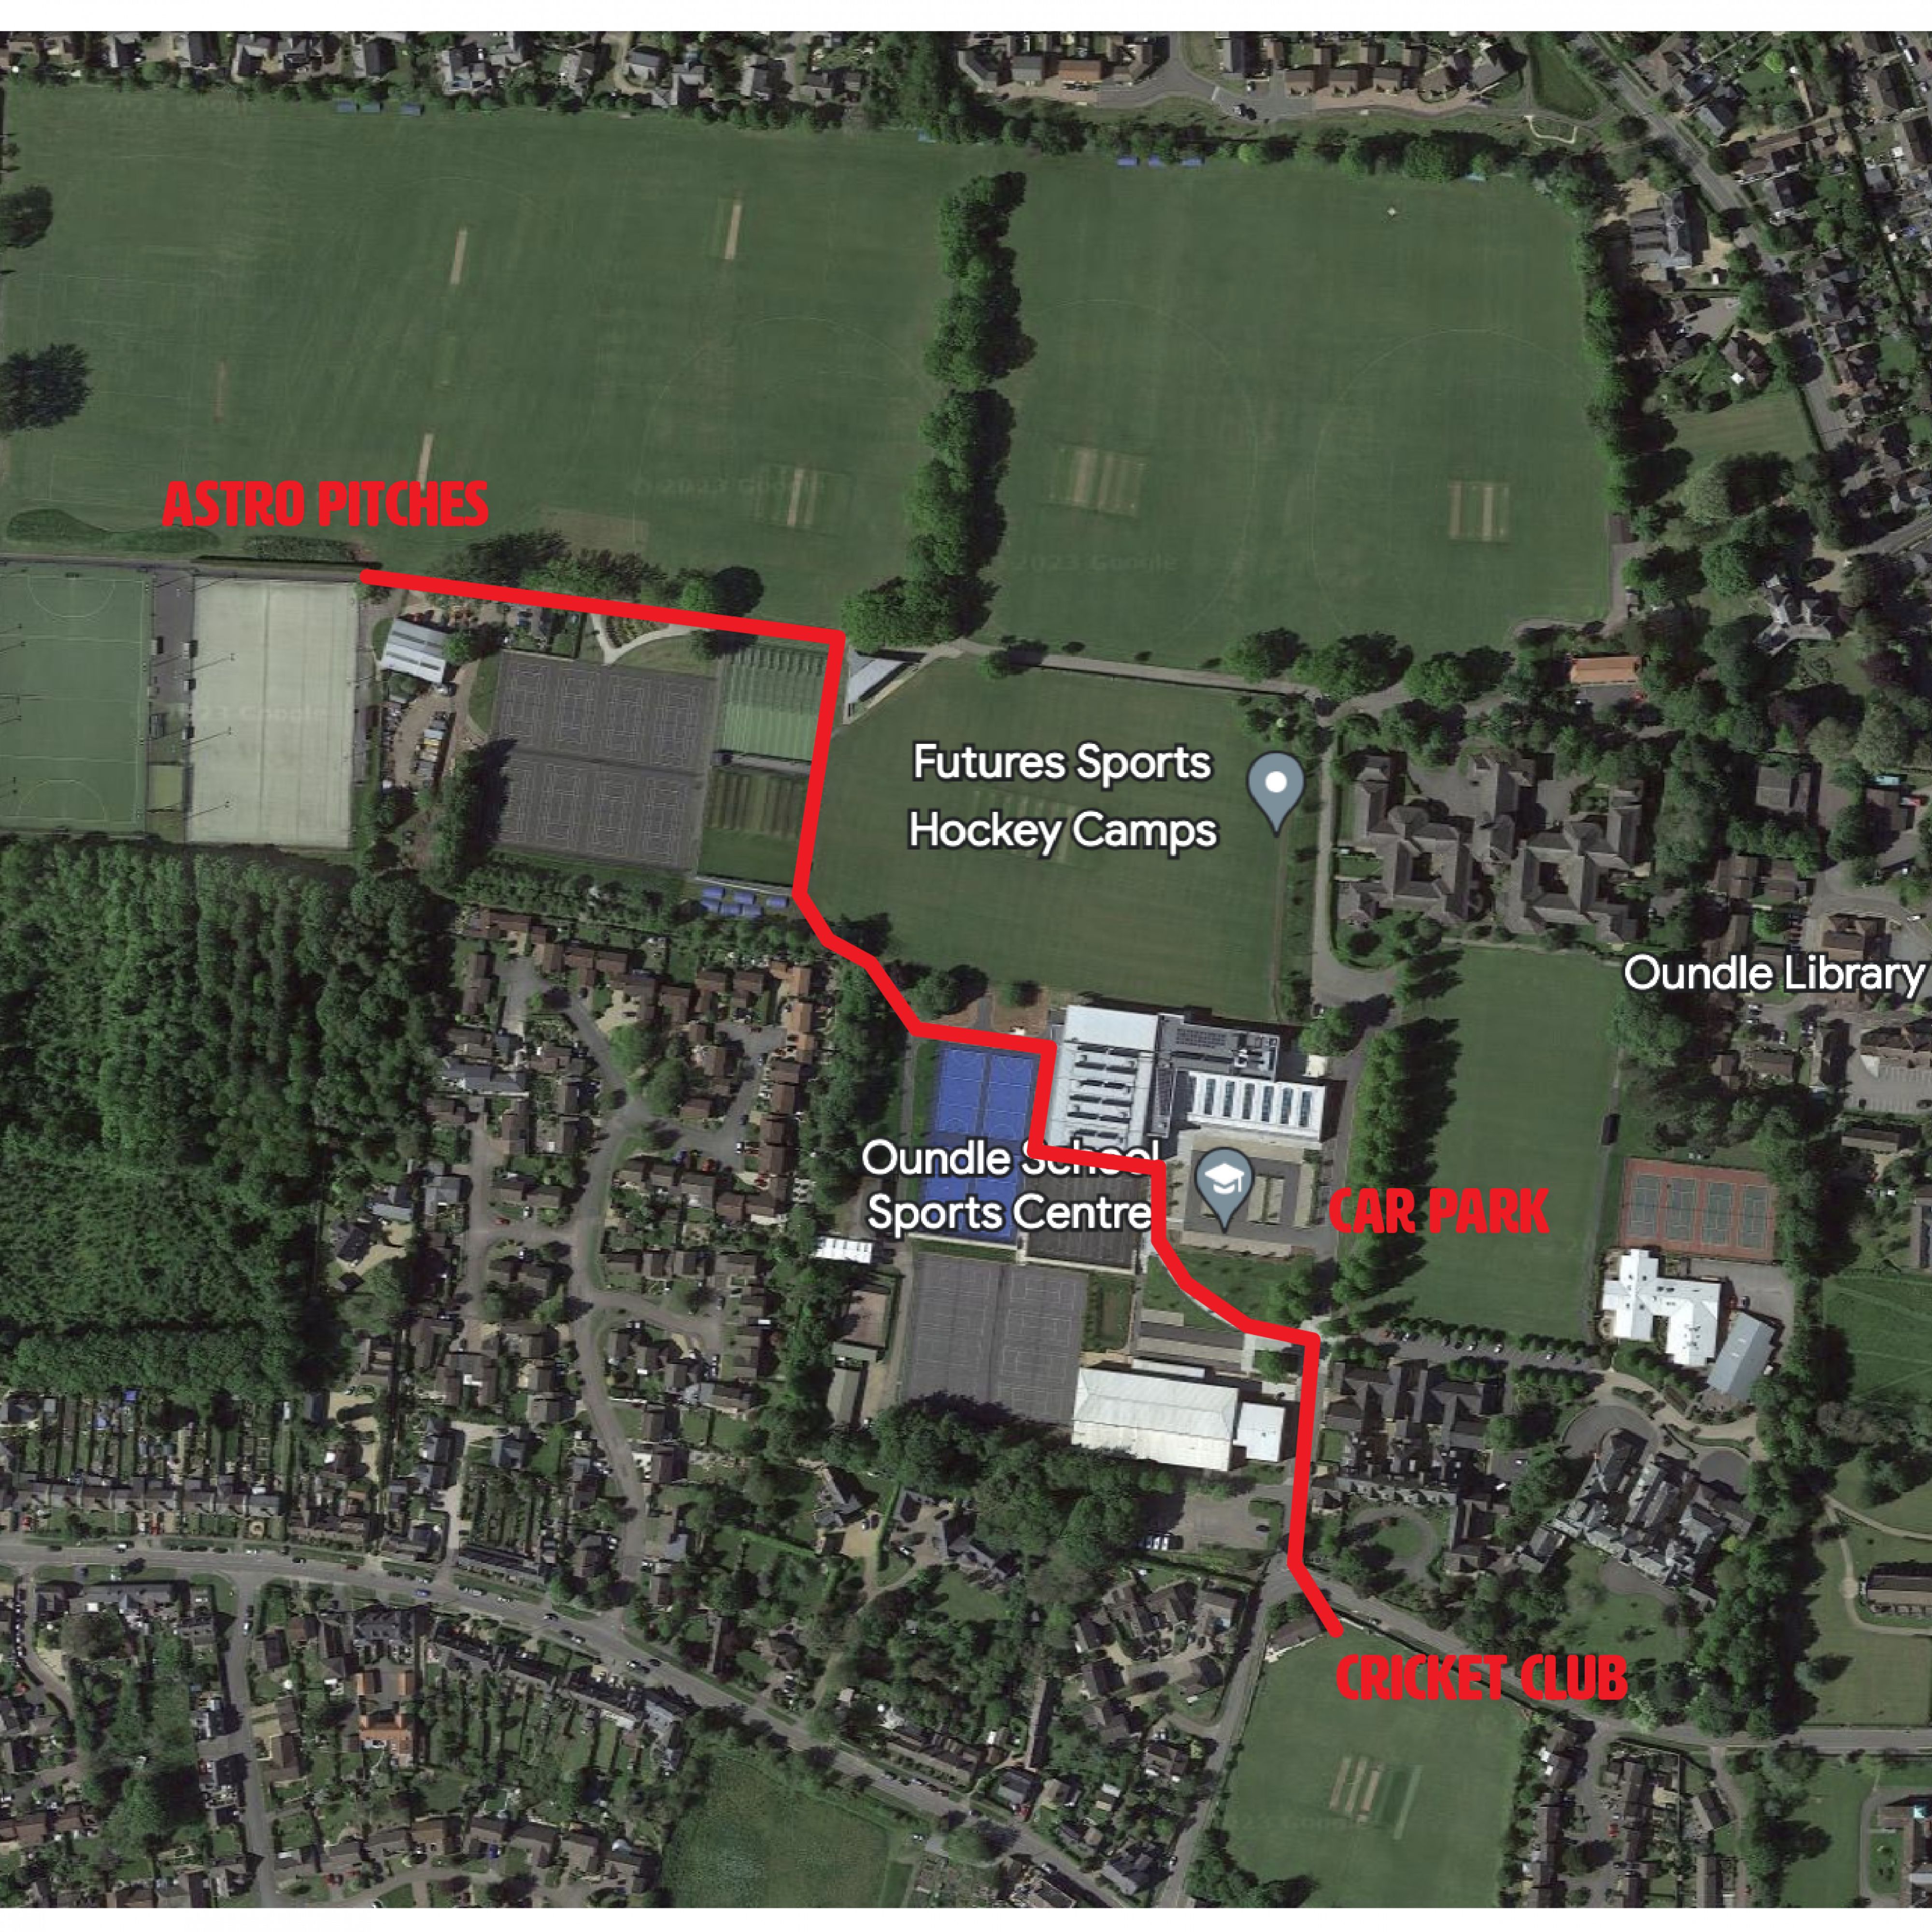 Oundle Cricket Club Directions